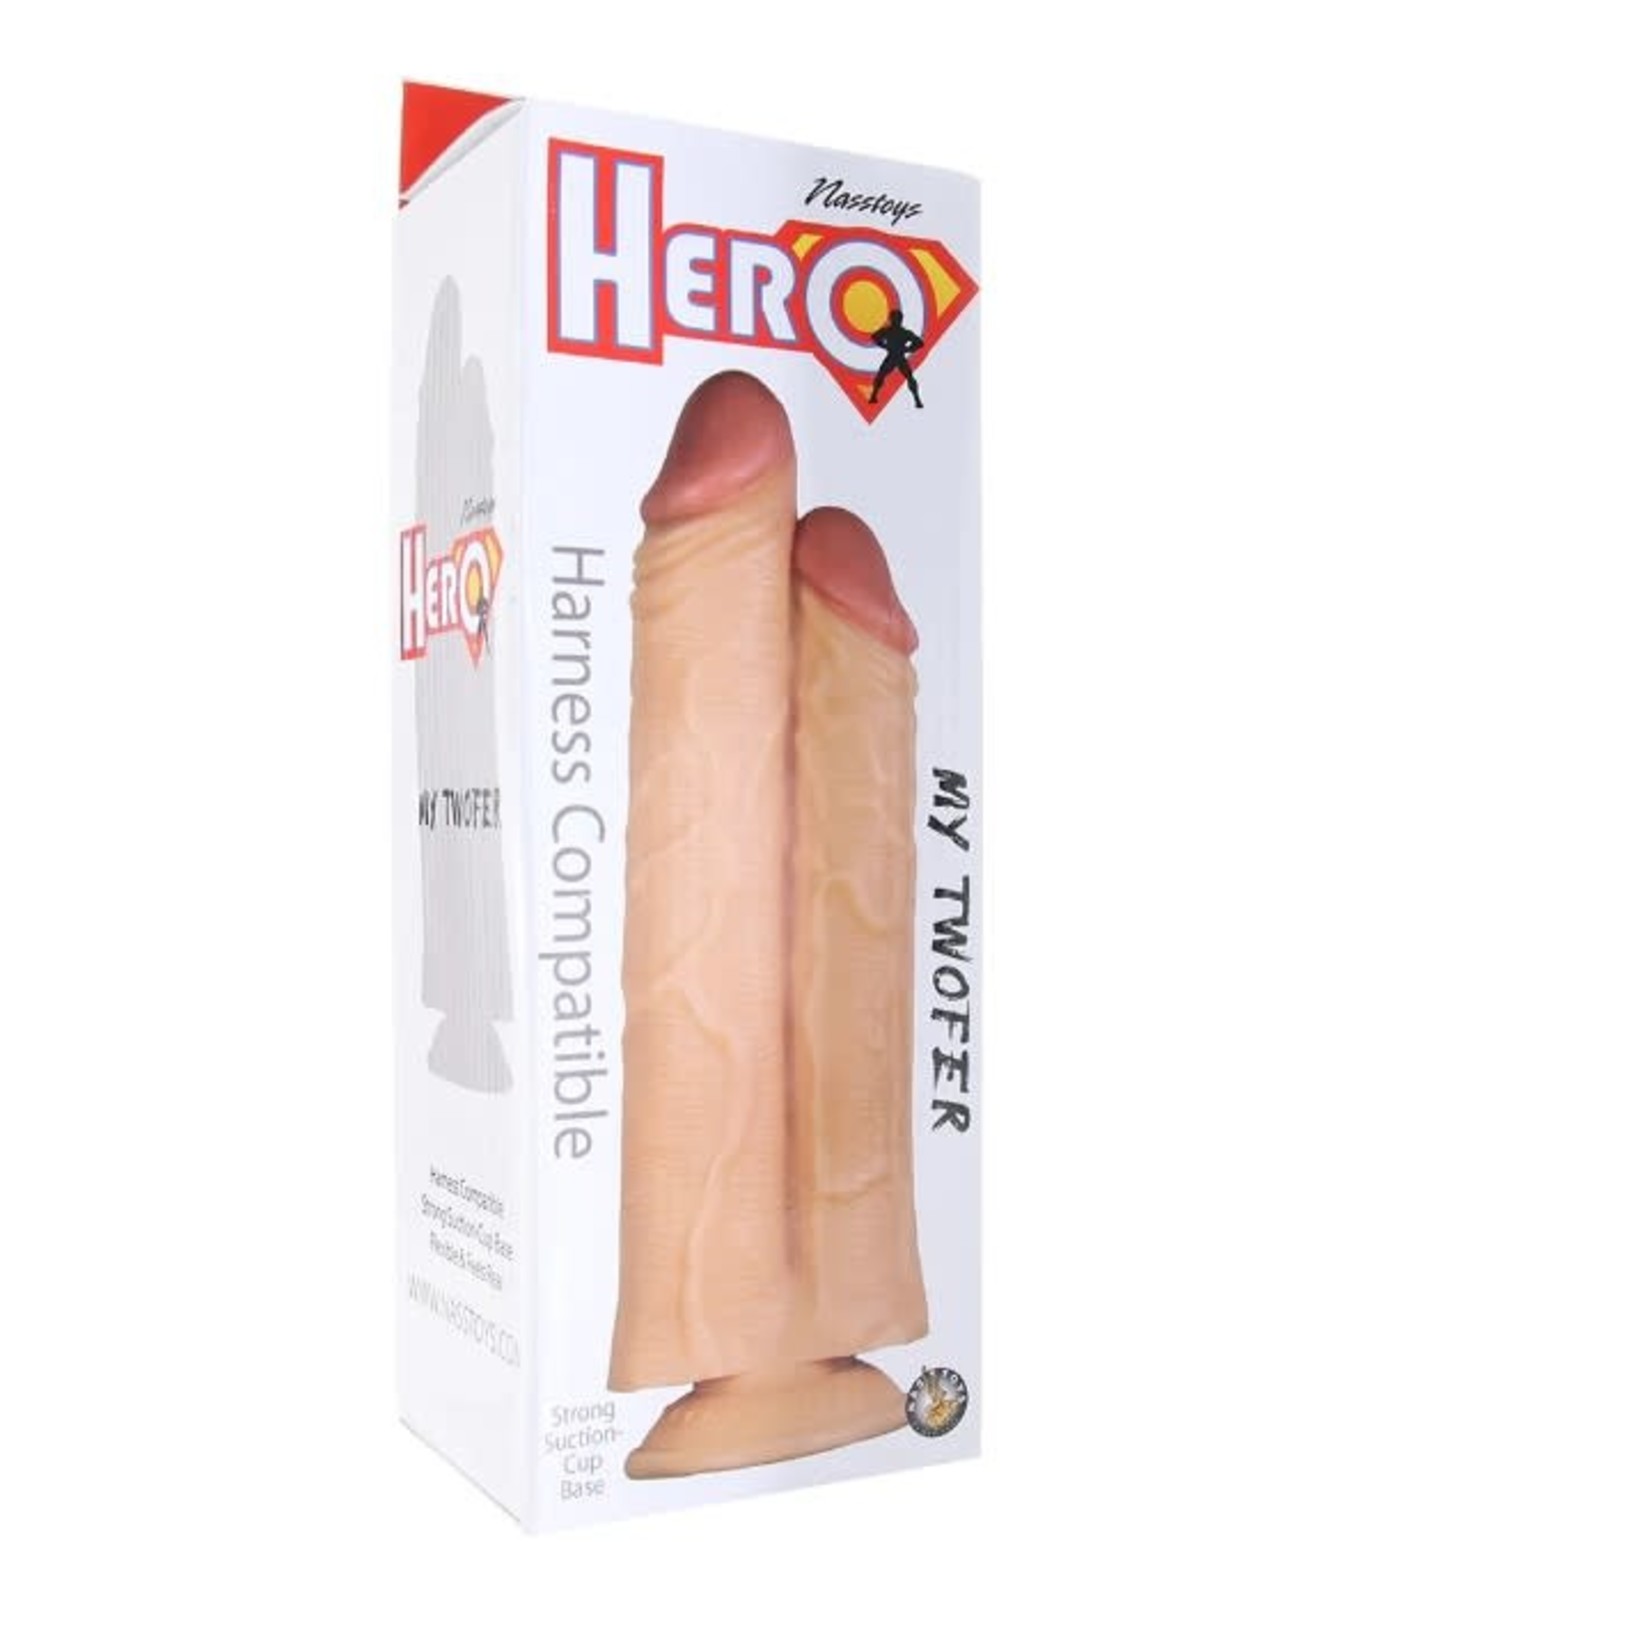 HERO MY TWOFER HARNESS COMPATIBLE DUAL DILDO